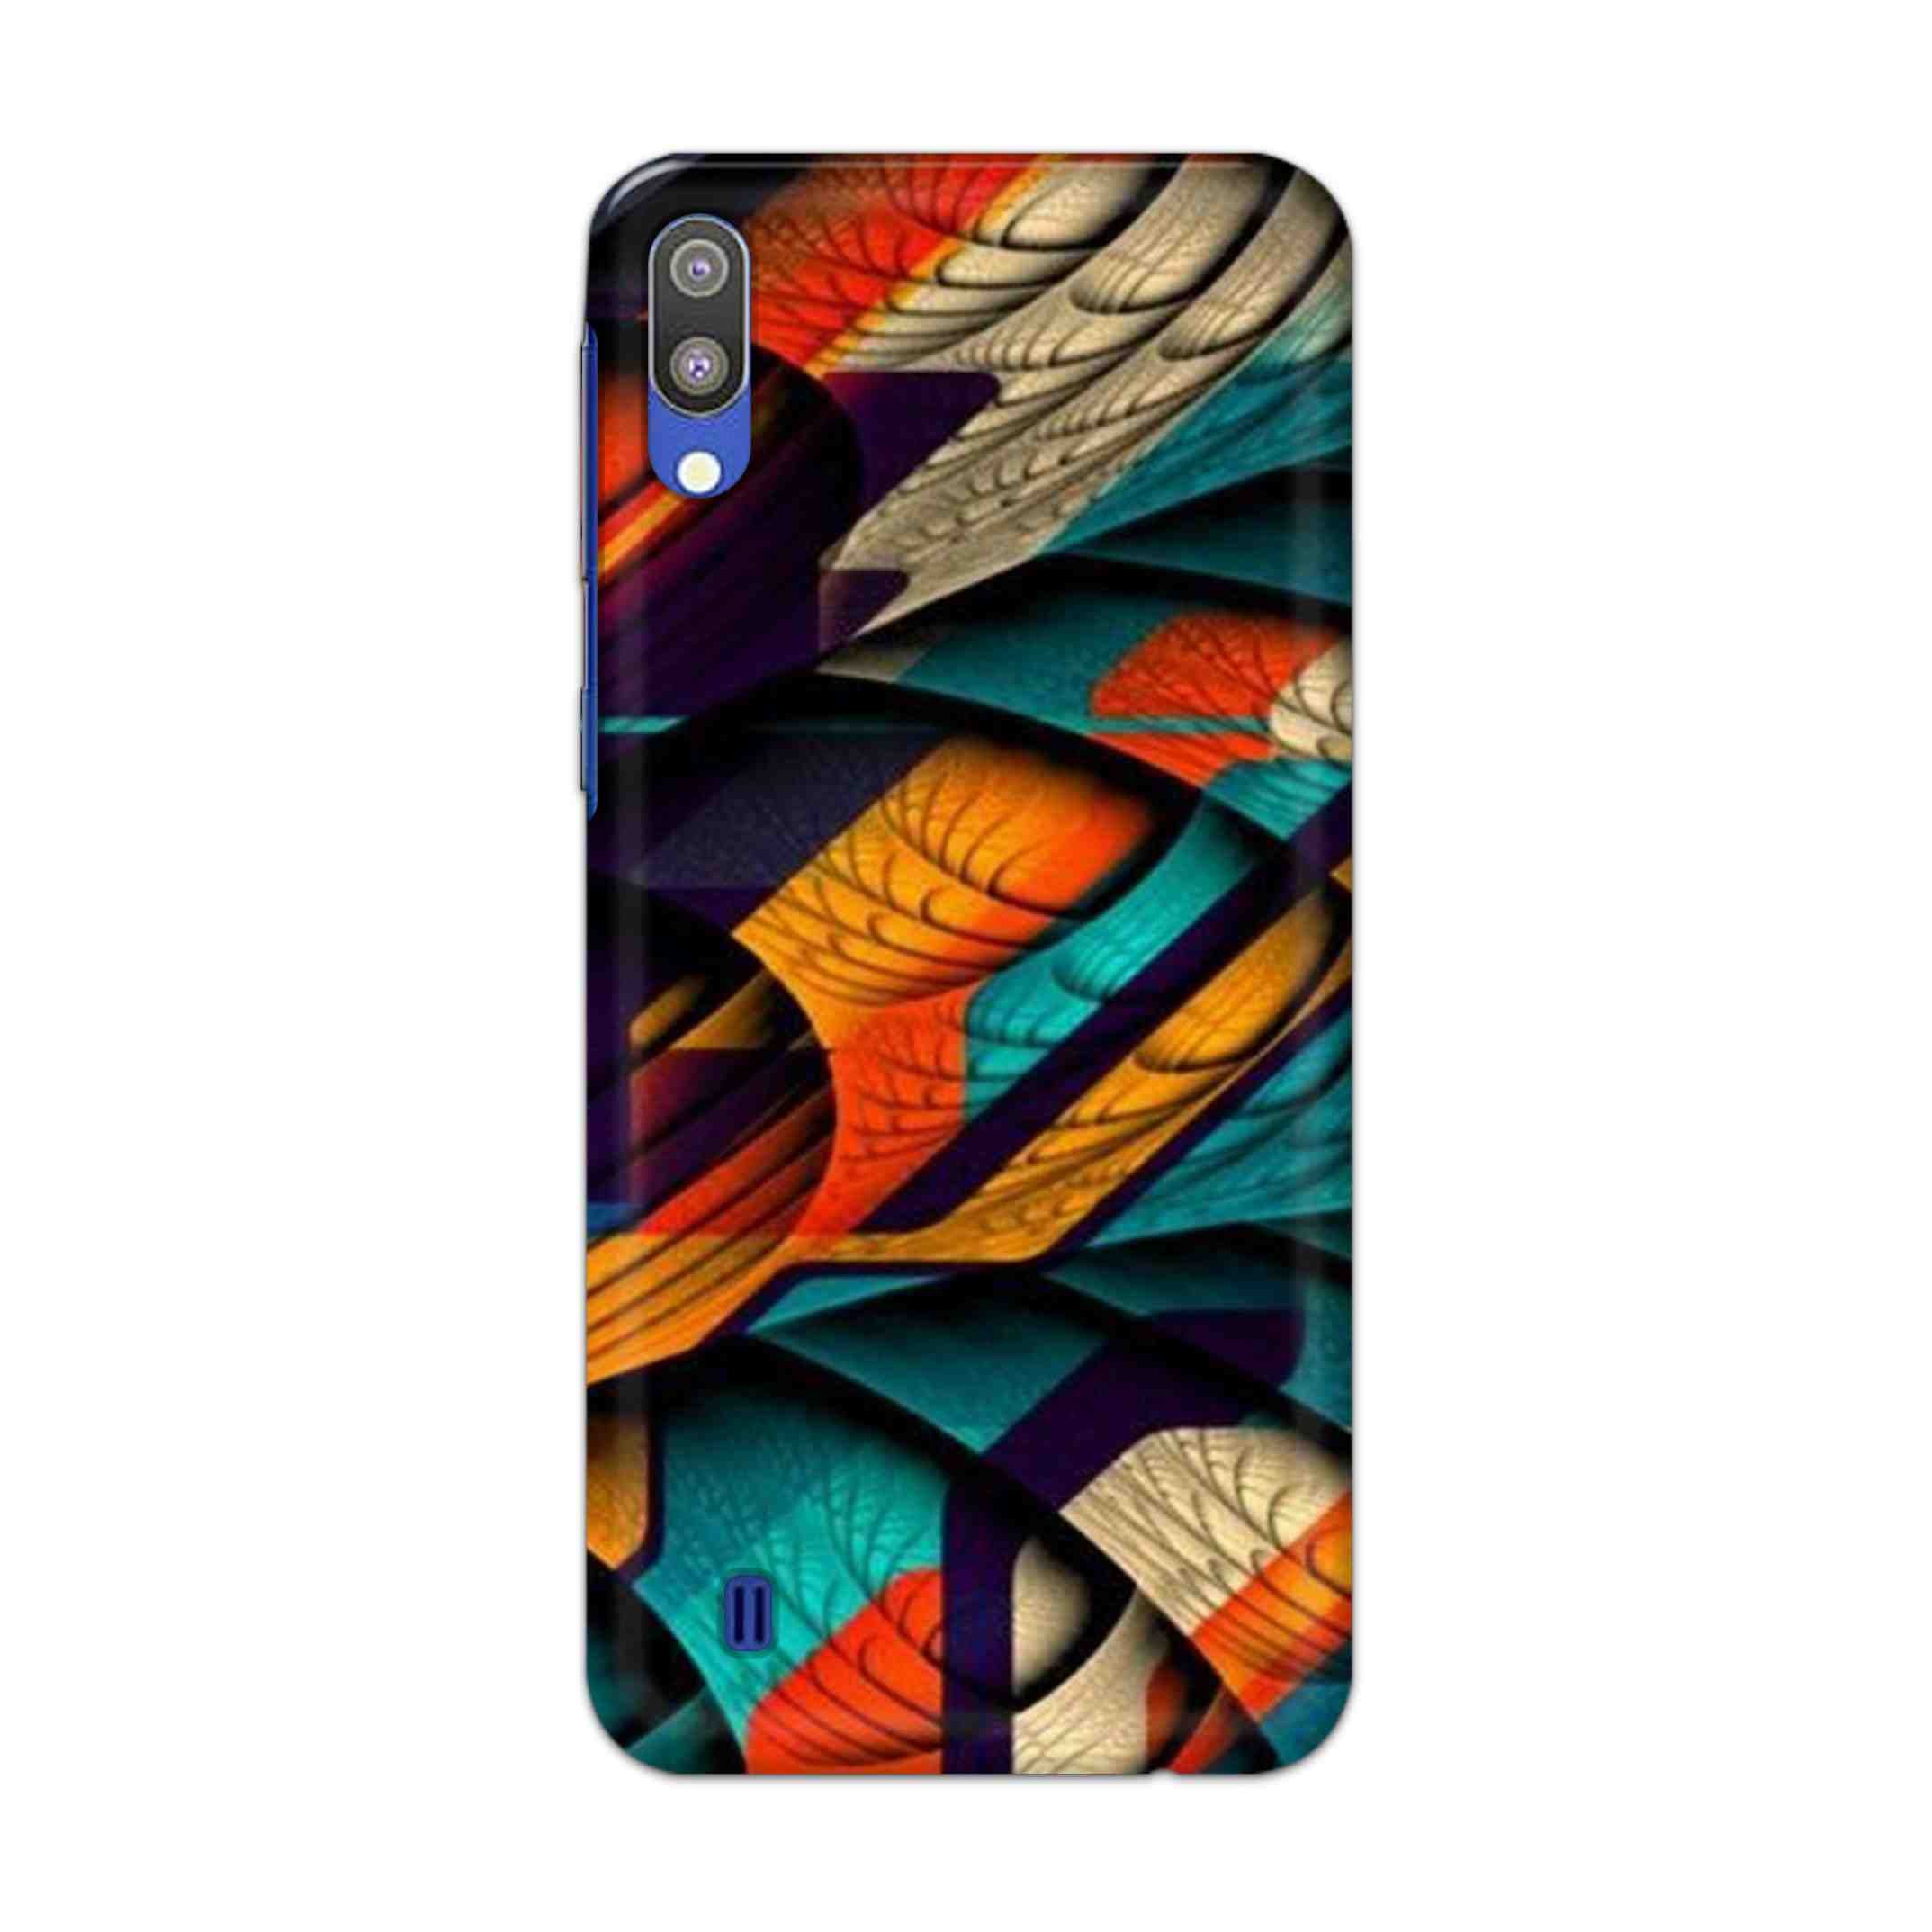 Buy Colour Abstract Hard Back Mobile Phone Case Cover For Samsung Galaxy M10 Online